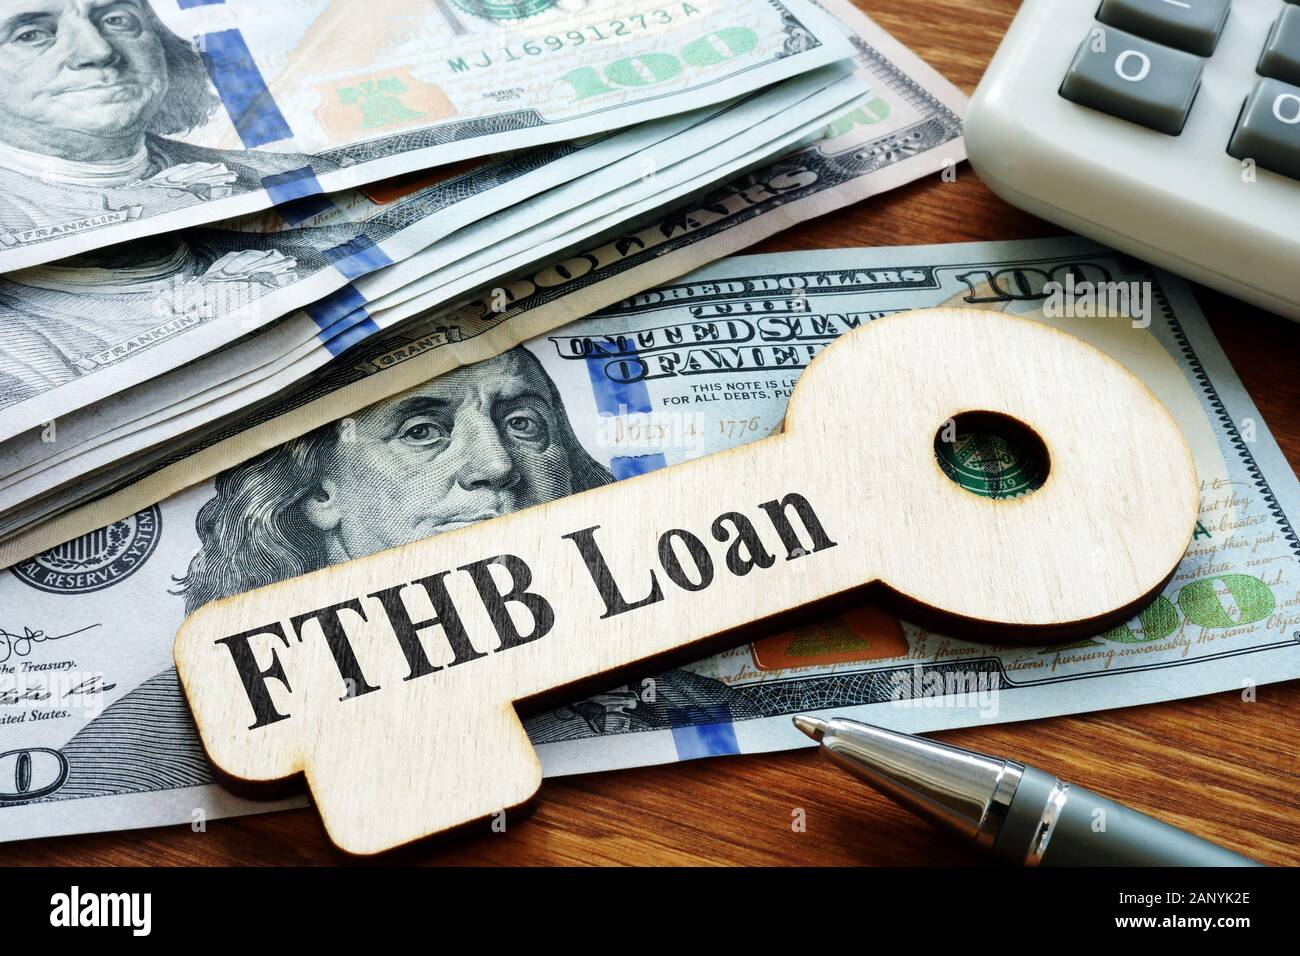 First-Time Homebuyer FTHB Loan printed on the wooden key. Stock Photo